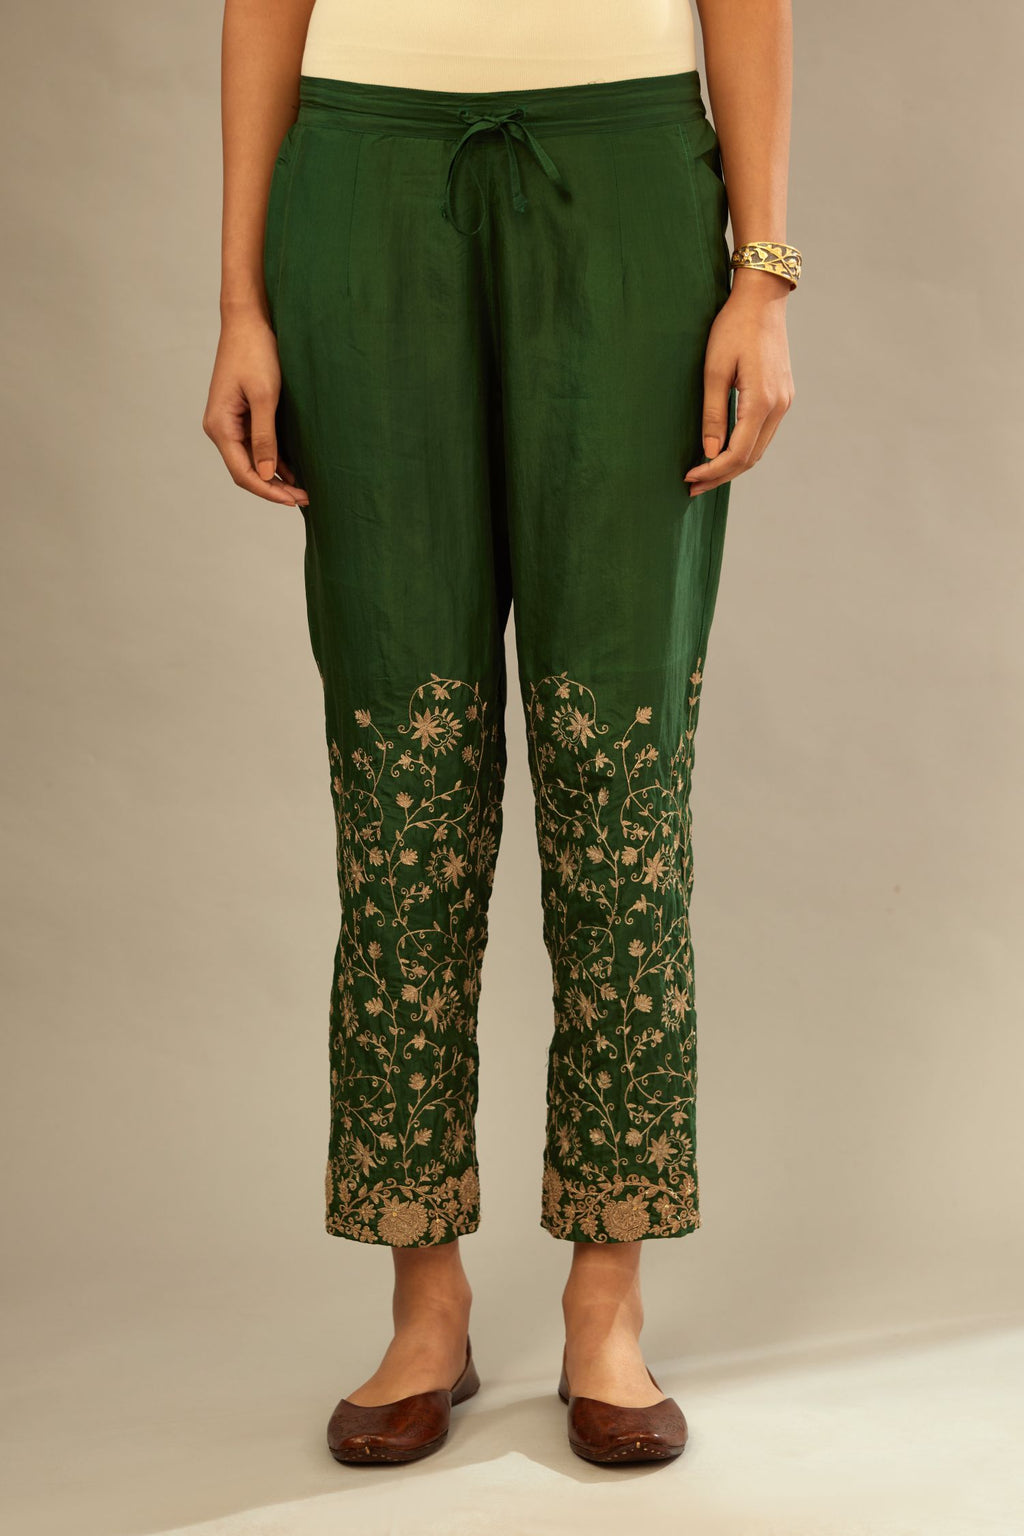 Buy Women Ankle Length Pants Green Solid Taffeta Silk for Best Price,  Reviews, Free Shipping